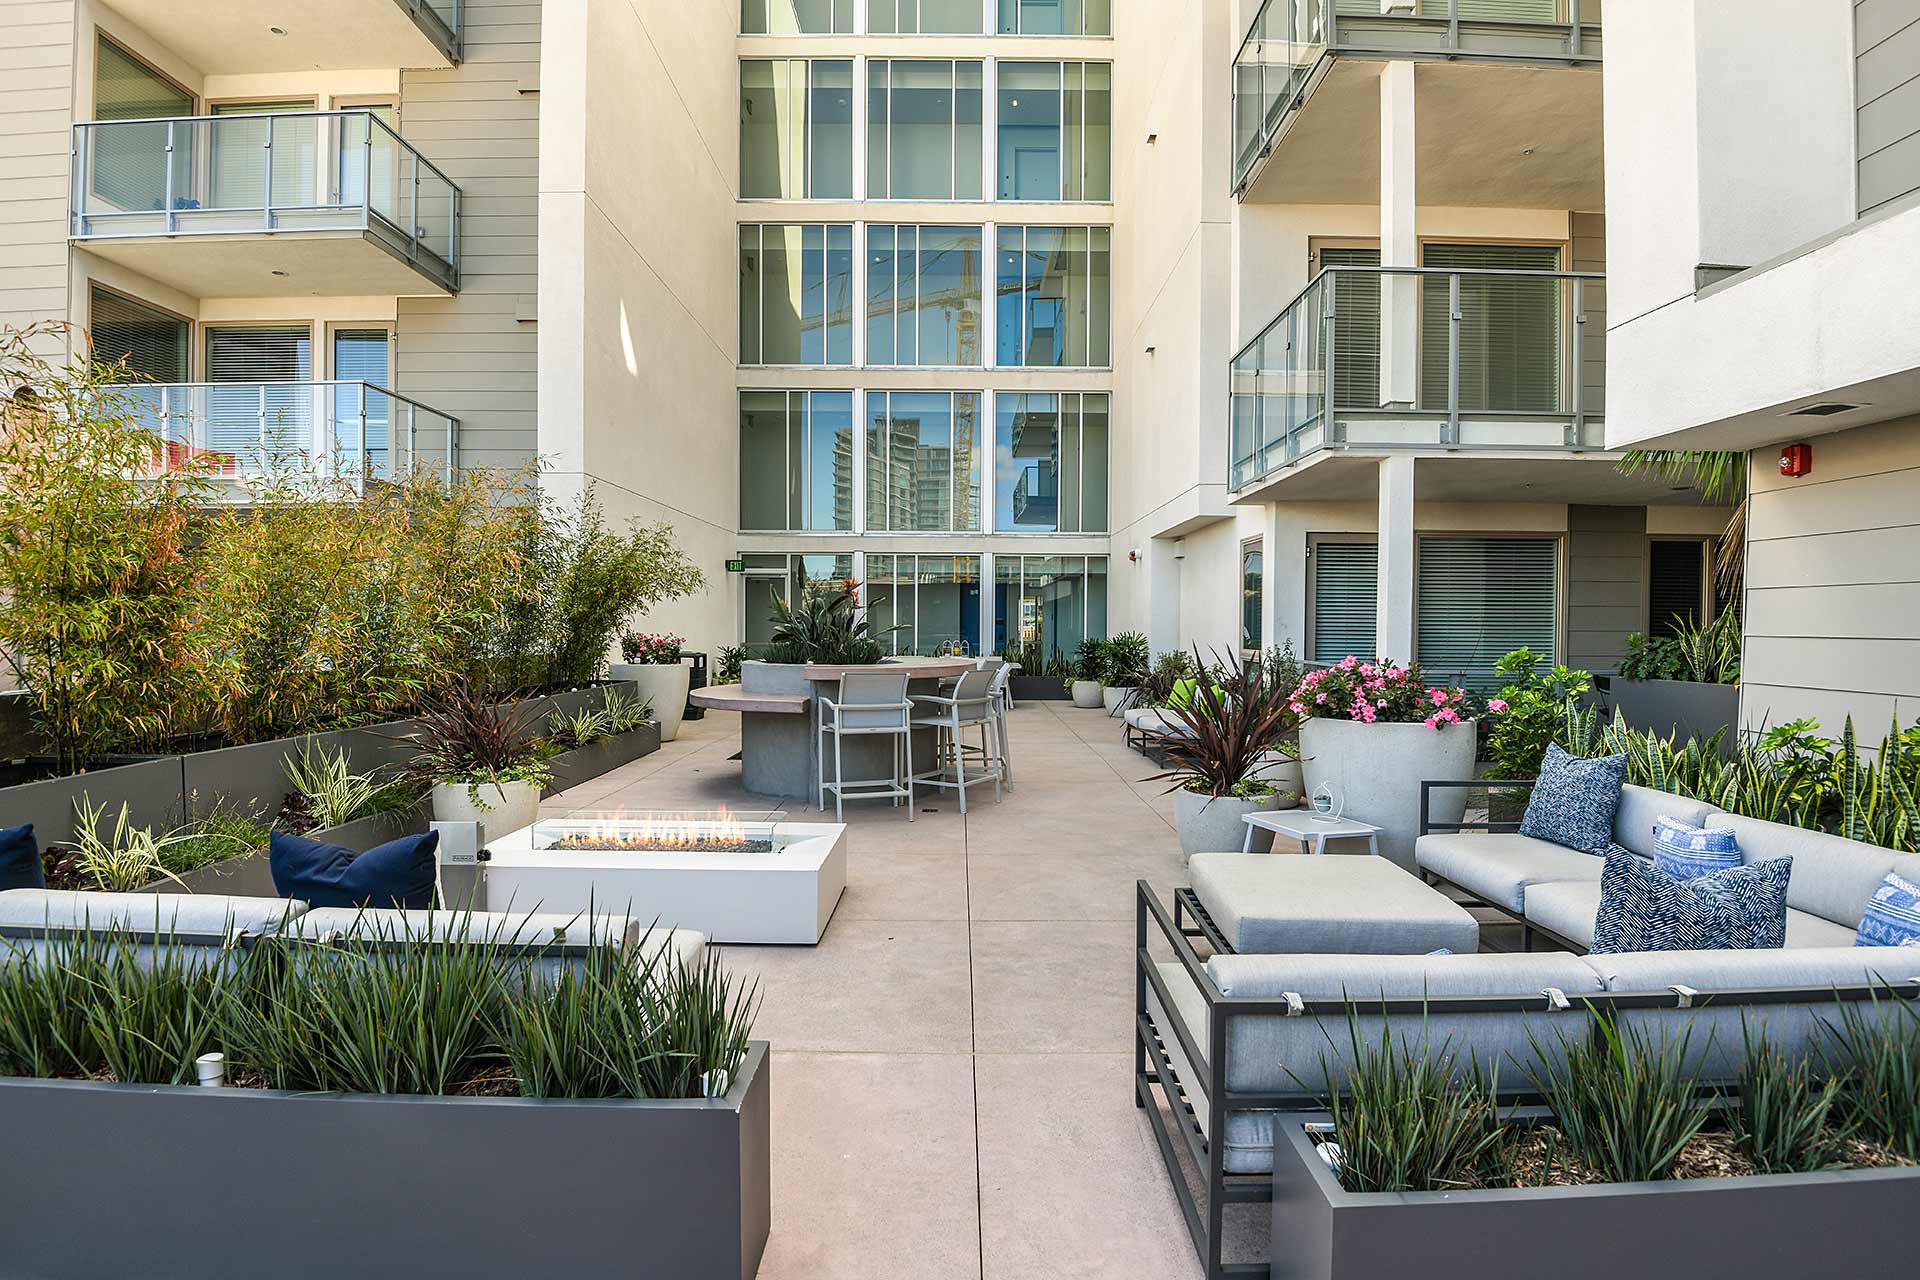 BBQ Grills and Lounge Area at F11 East Village Luxury Apartments in downtown San Diego, CA